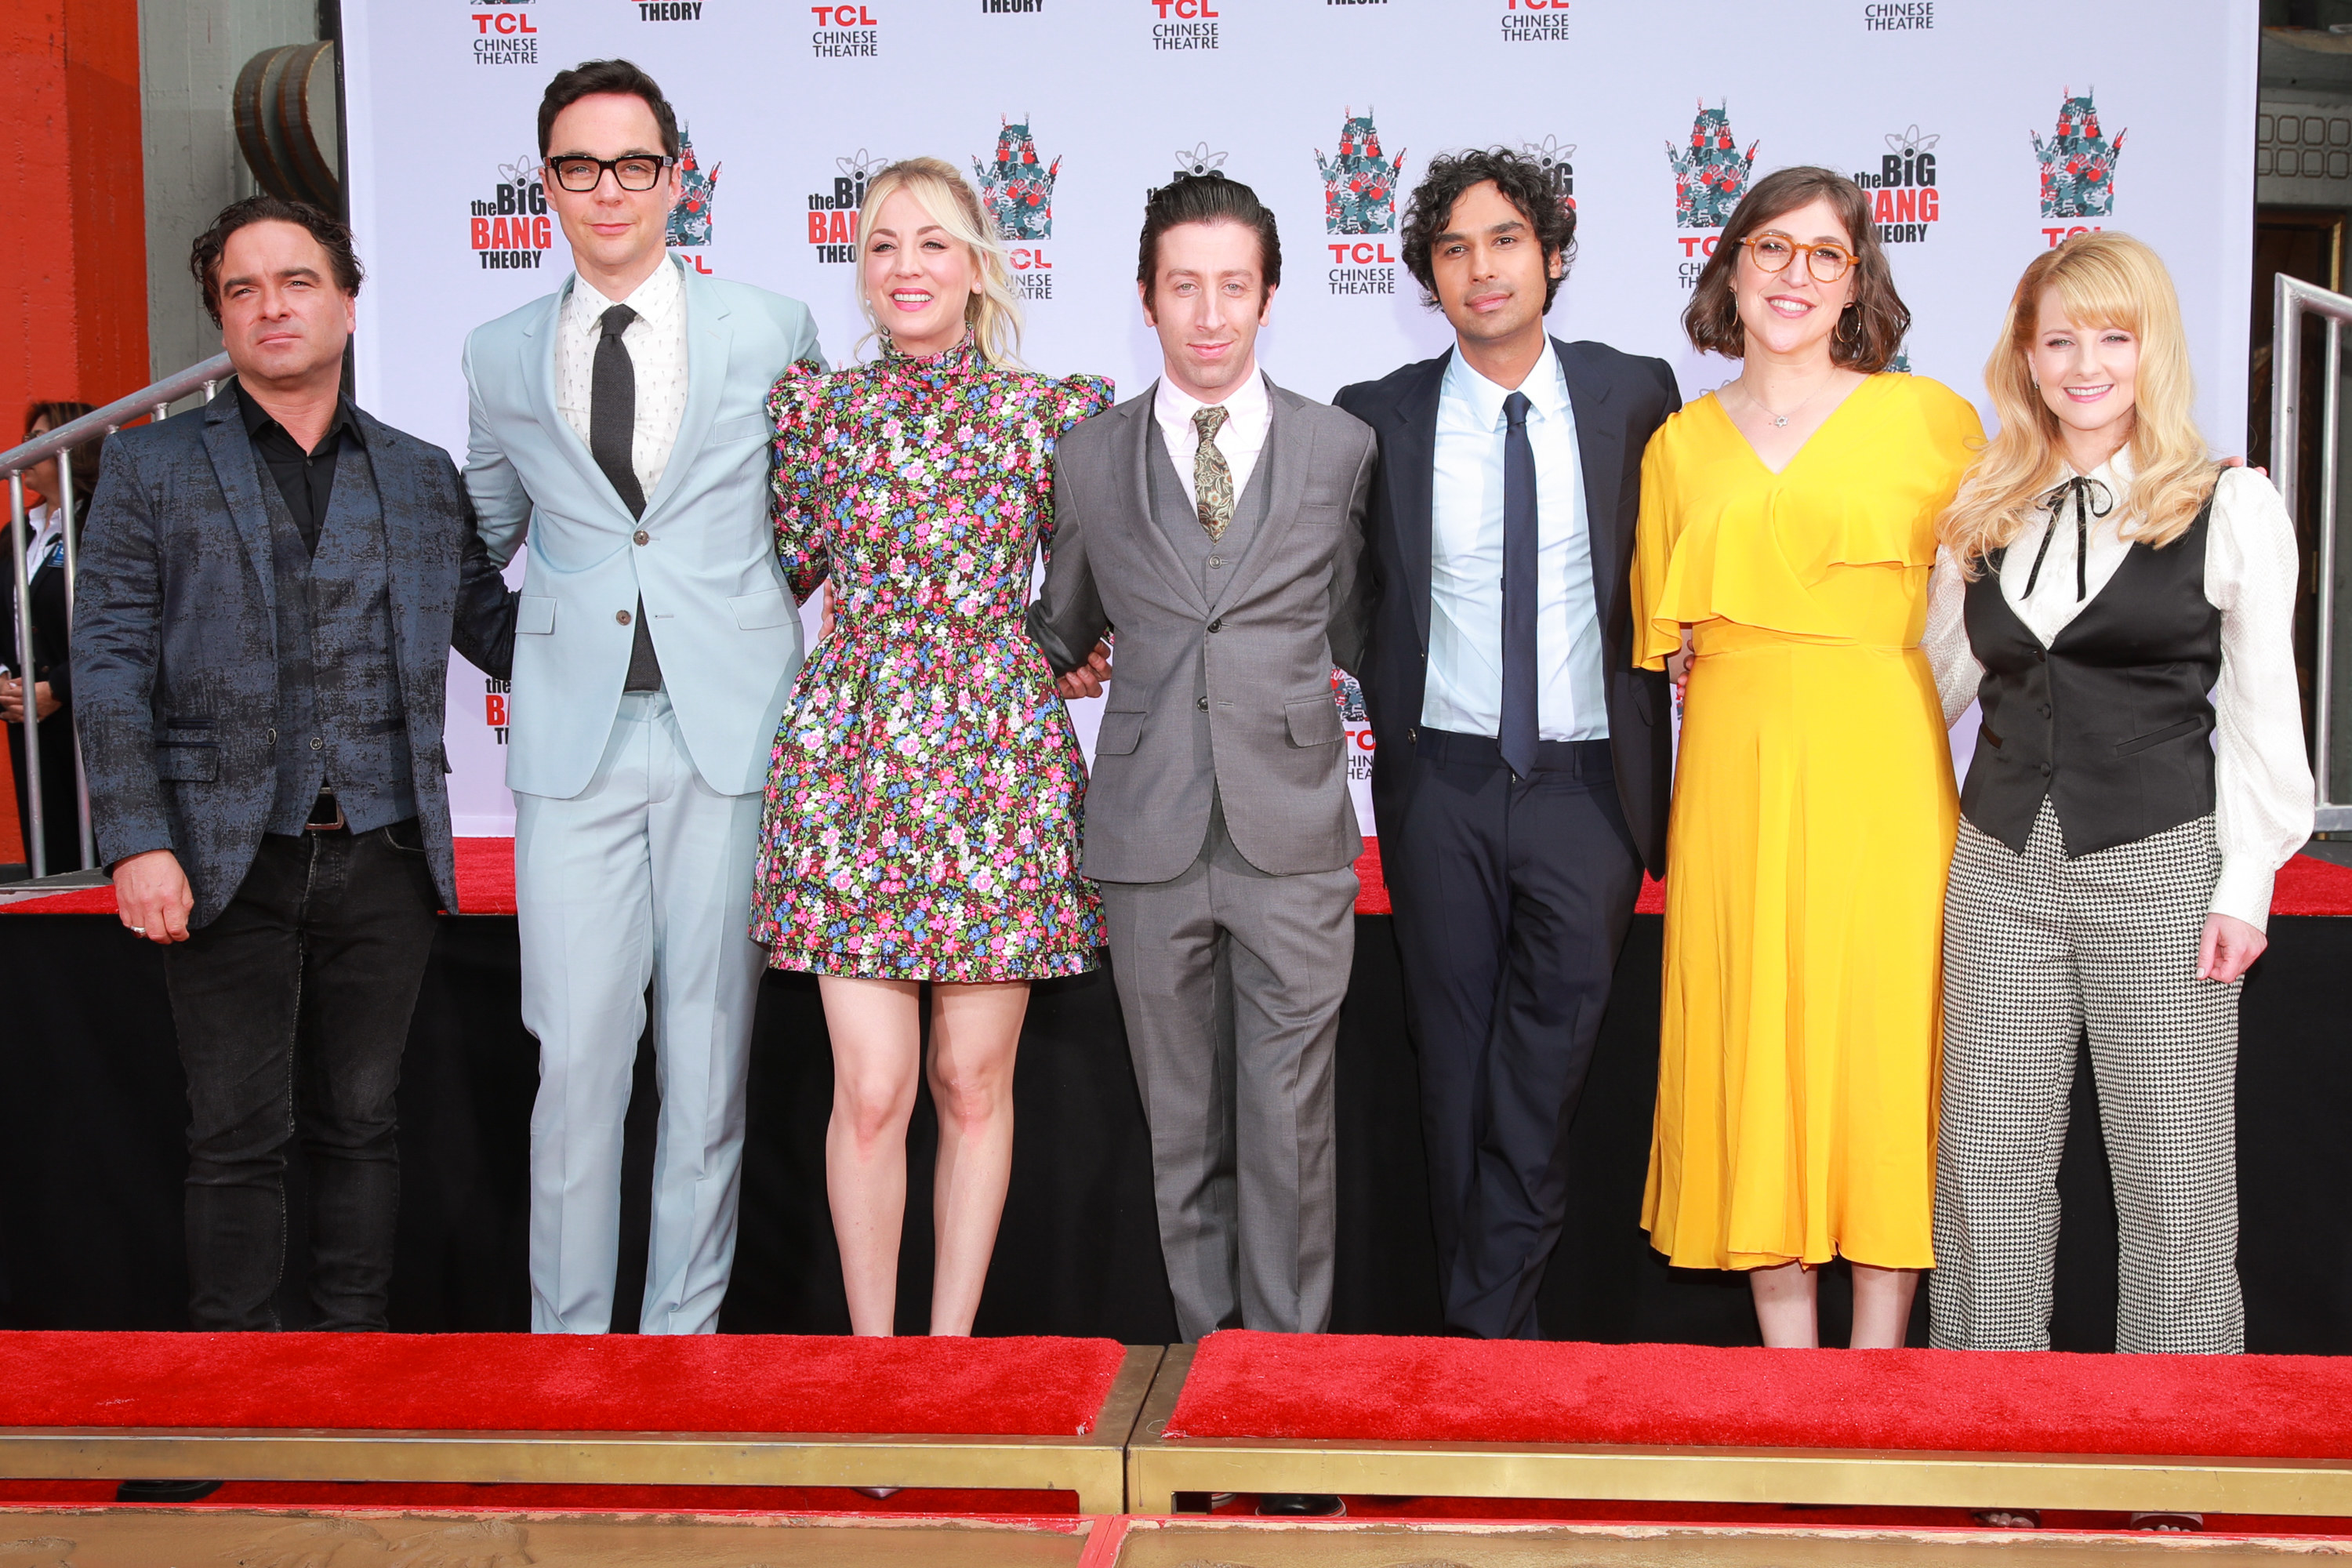 The cast pose for a photo at a red carpet event